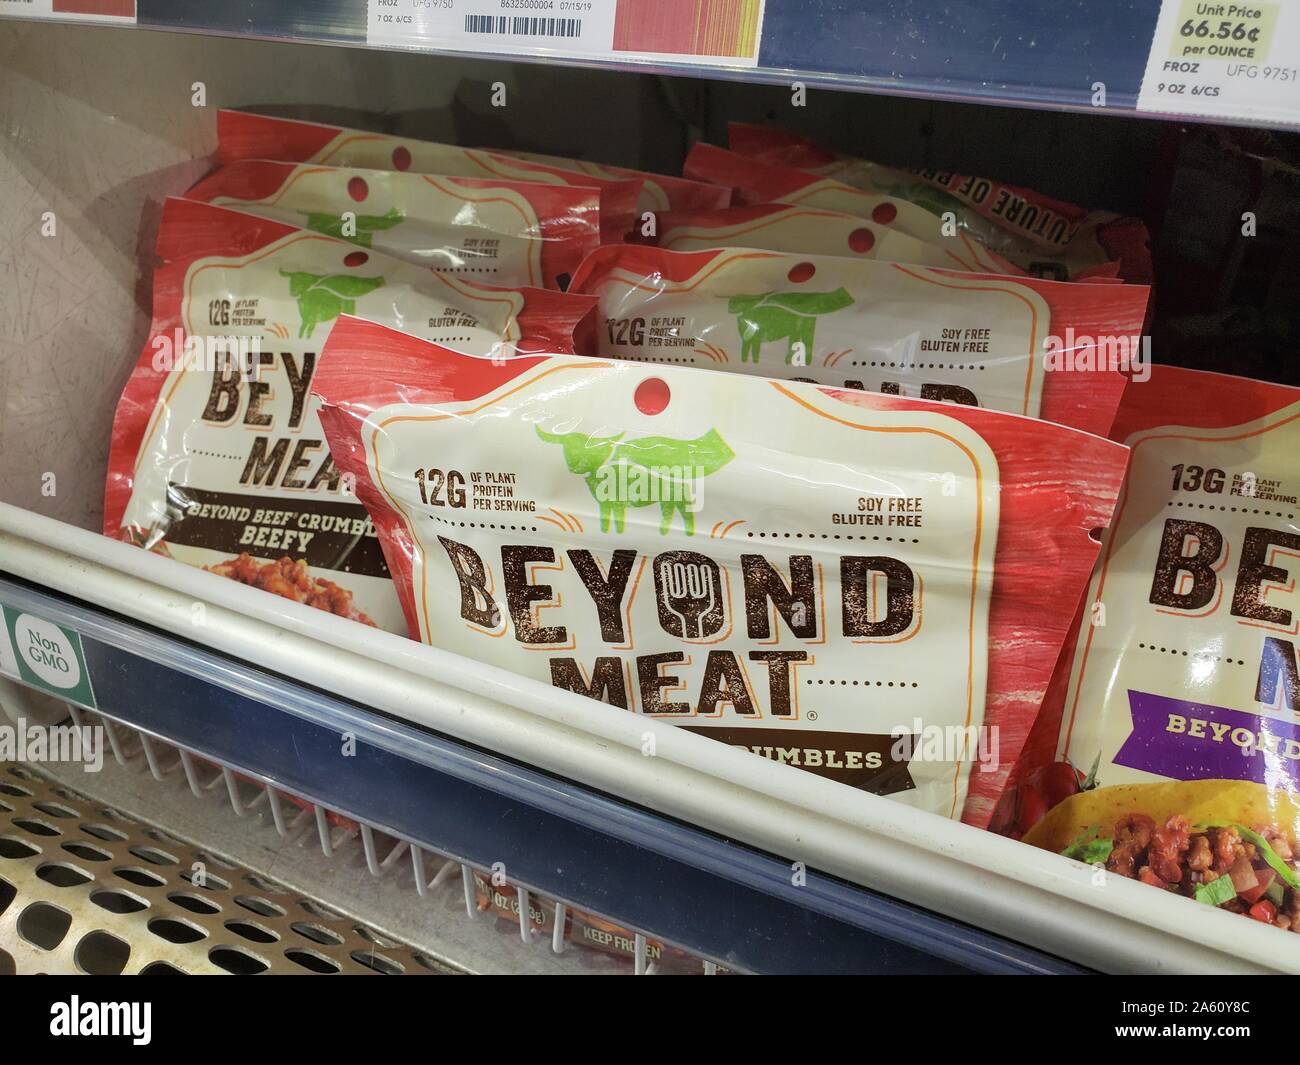 Engineered plant-based frozen crumbles from food company Beyond Meat are visible on shelves among other meat alternatives at a grocery store in San Ramon, California, September 3, 2019. () Stock Photo